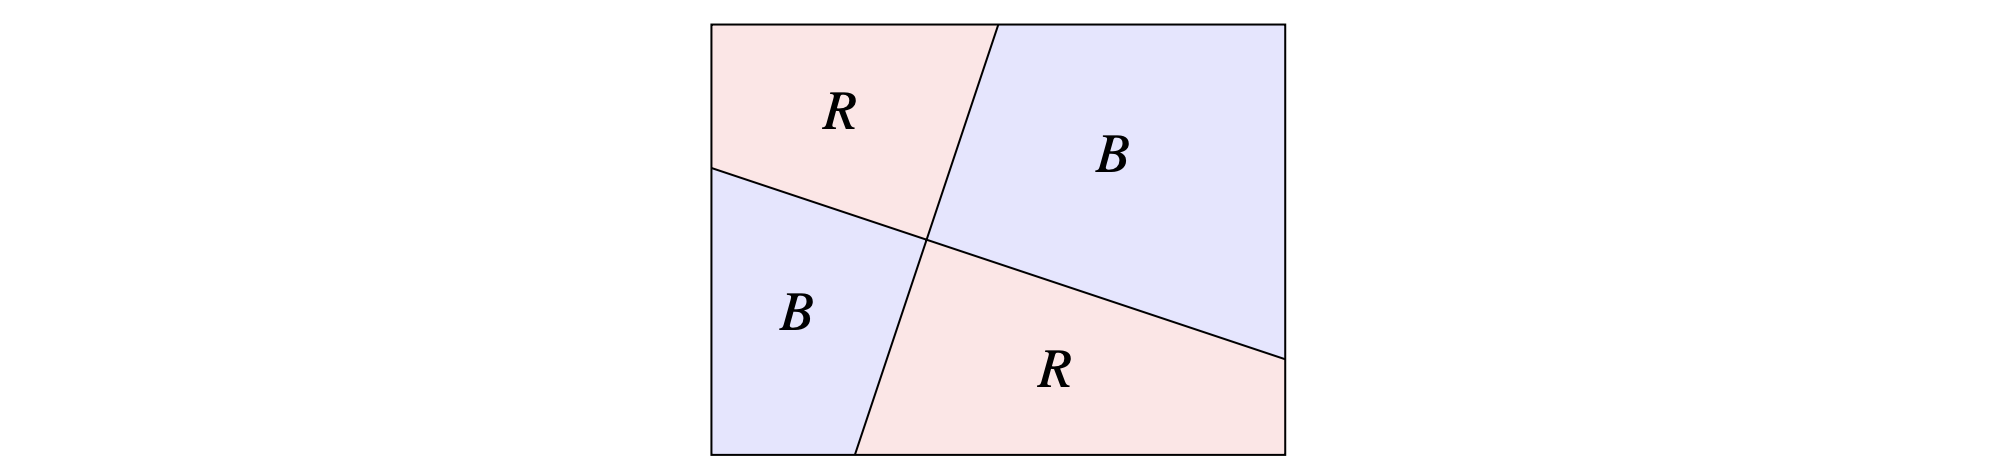 two-colored-example